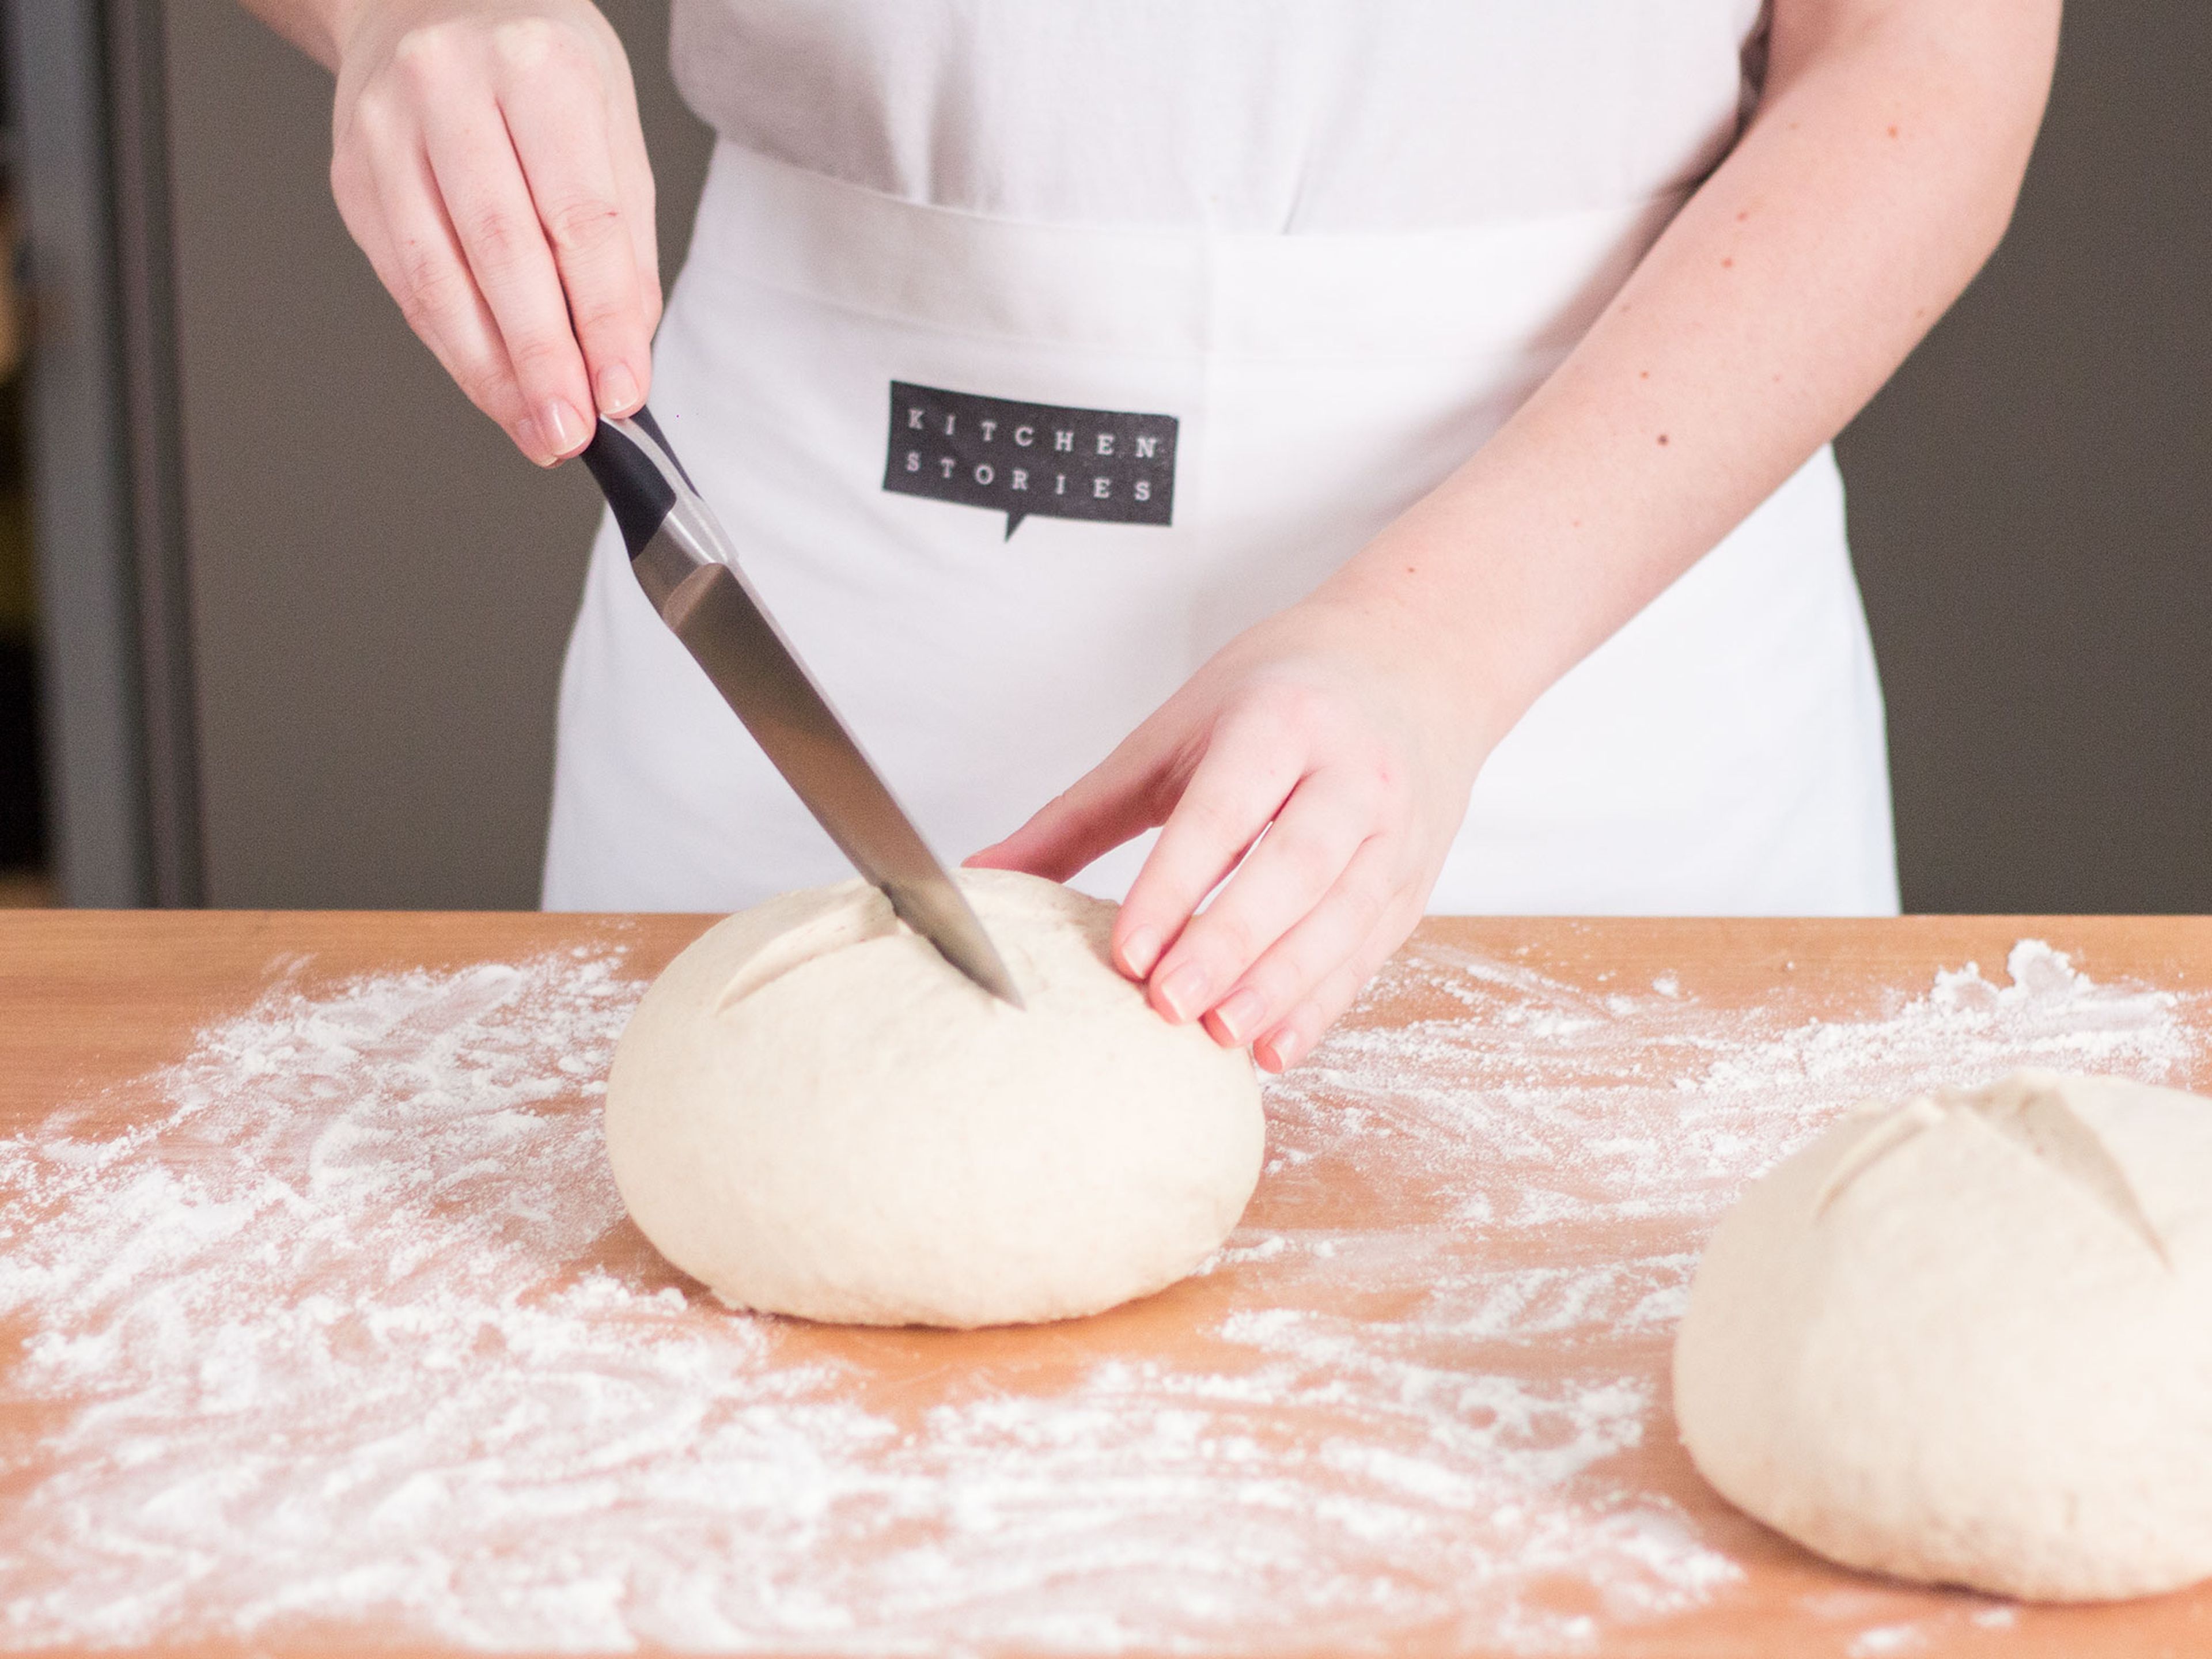 Preheat oven to 220°C/425°F. When dough has finished rising, knead by hand on a floured surface until smooth. Divide dough and form loafs approx. the width of a stretched out hand in diameter. Cover and allow to sit at room temperature on a baking sheet lined with parchment paper for approx. 30 min. When the dough has doubled in volume, make a crosswise incision in the top. Transfer to preheated oven. Place a baking dish filled with water on the bottom rack. Bake the bread for approx. 30 - 40 min. until the crust is golden. Set aside to cool. Serve it with butter and sprinkle with our BUTTERBROT BABY seasoning if liking.